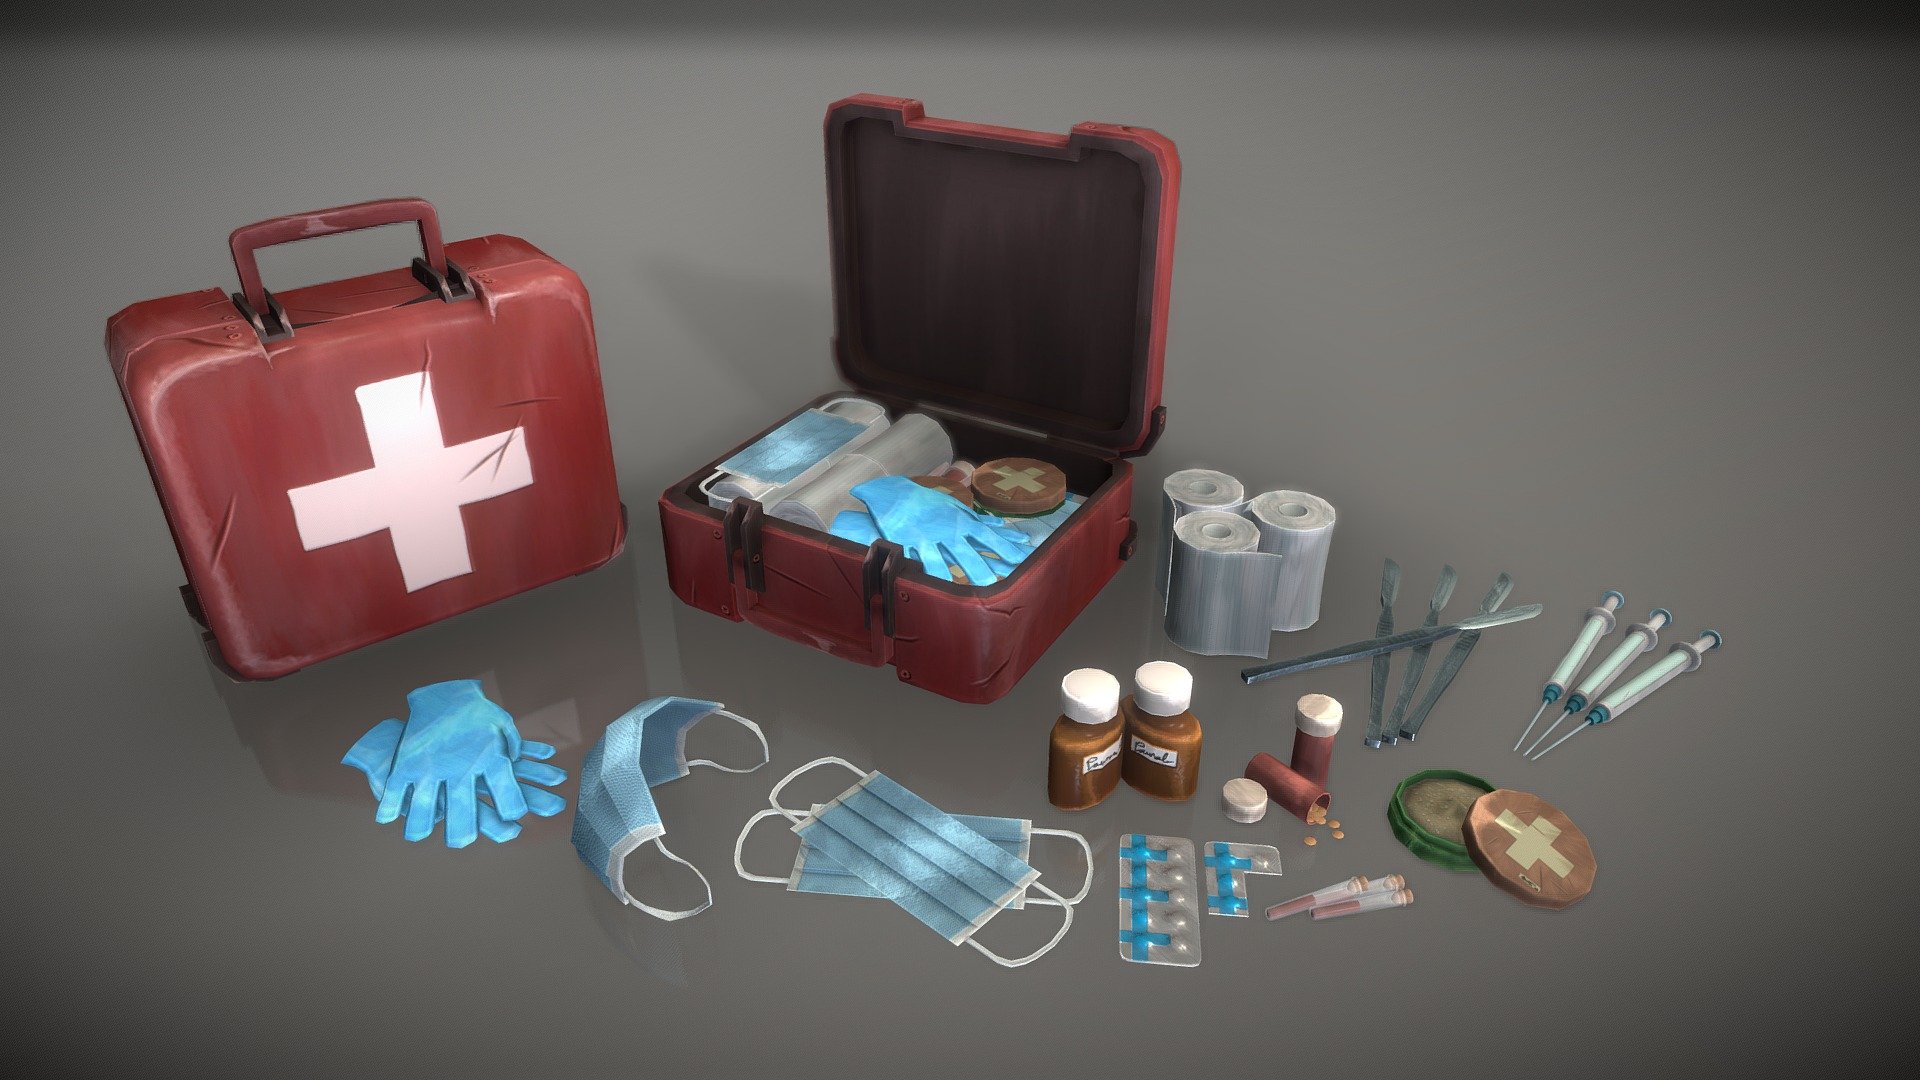 A compact medical is useful in a survival situation. This asset is best for a top-down game. It's already optimized to fits into your scene. So you can also apply this asset to variety of games.
This Package contains :




58 Objects 

1 Sample package

Blender Files

Texture Files

For further business or information about 3D Assets, You can contact me on my Instagram. I put the link in my bio. You can also write your comment on my asset post.
Thank you for visiting - Medical Pack - 3D Low Poly for Game Assets - Buy Royalty Free 3D model by _Alcane 3d model